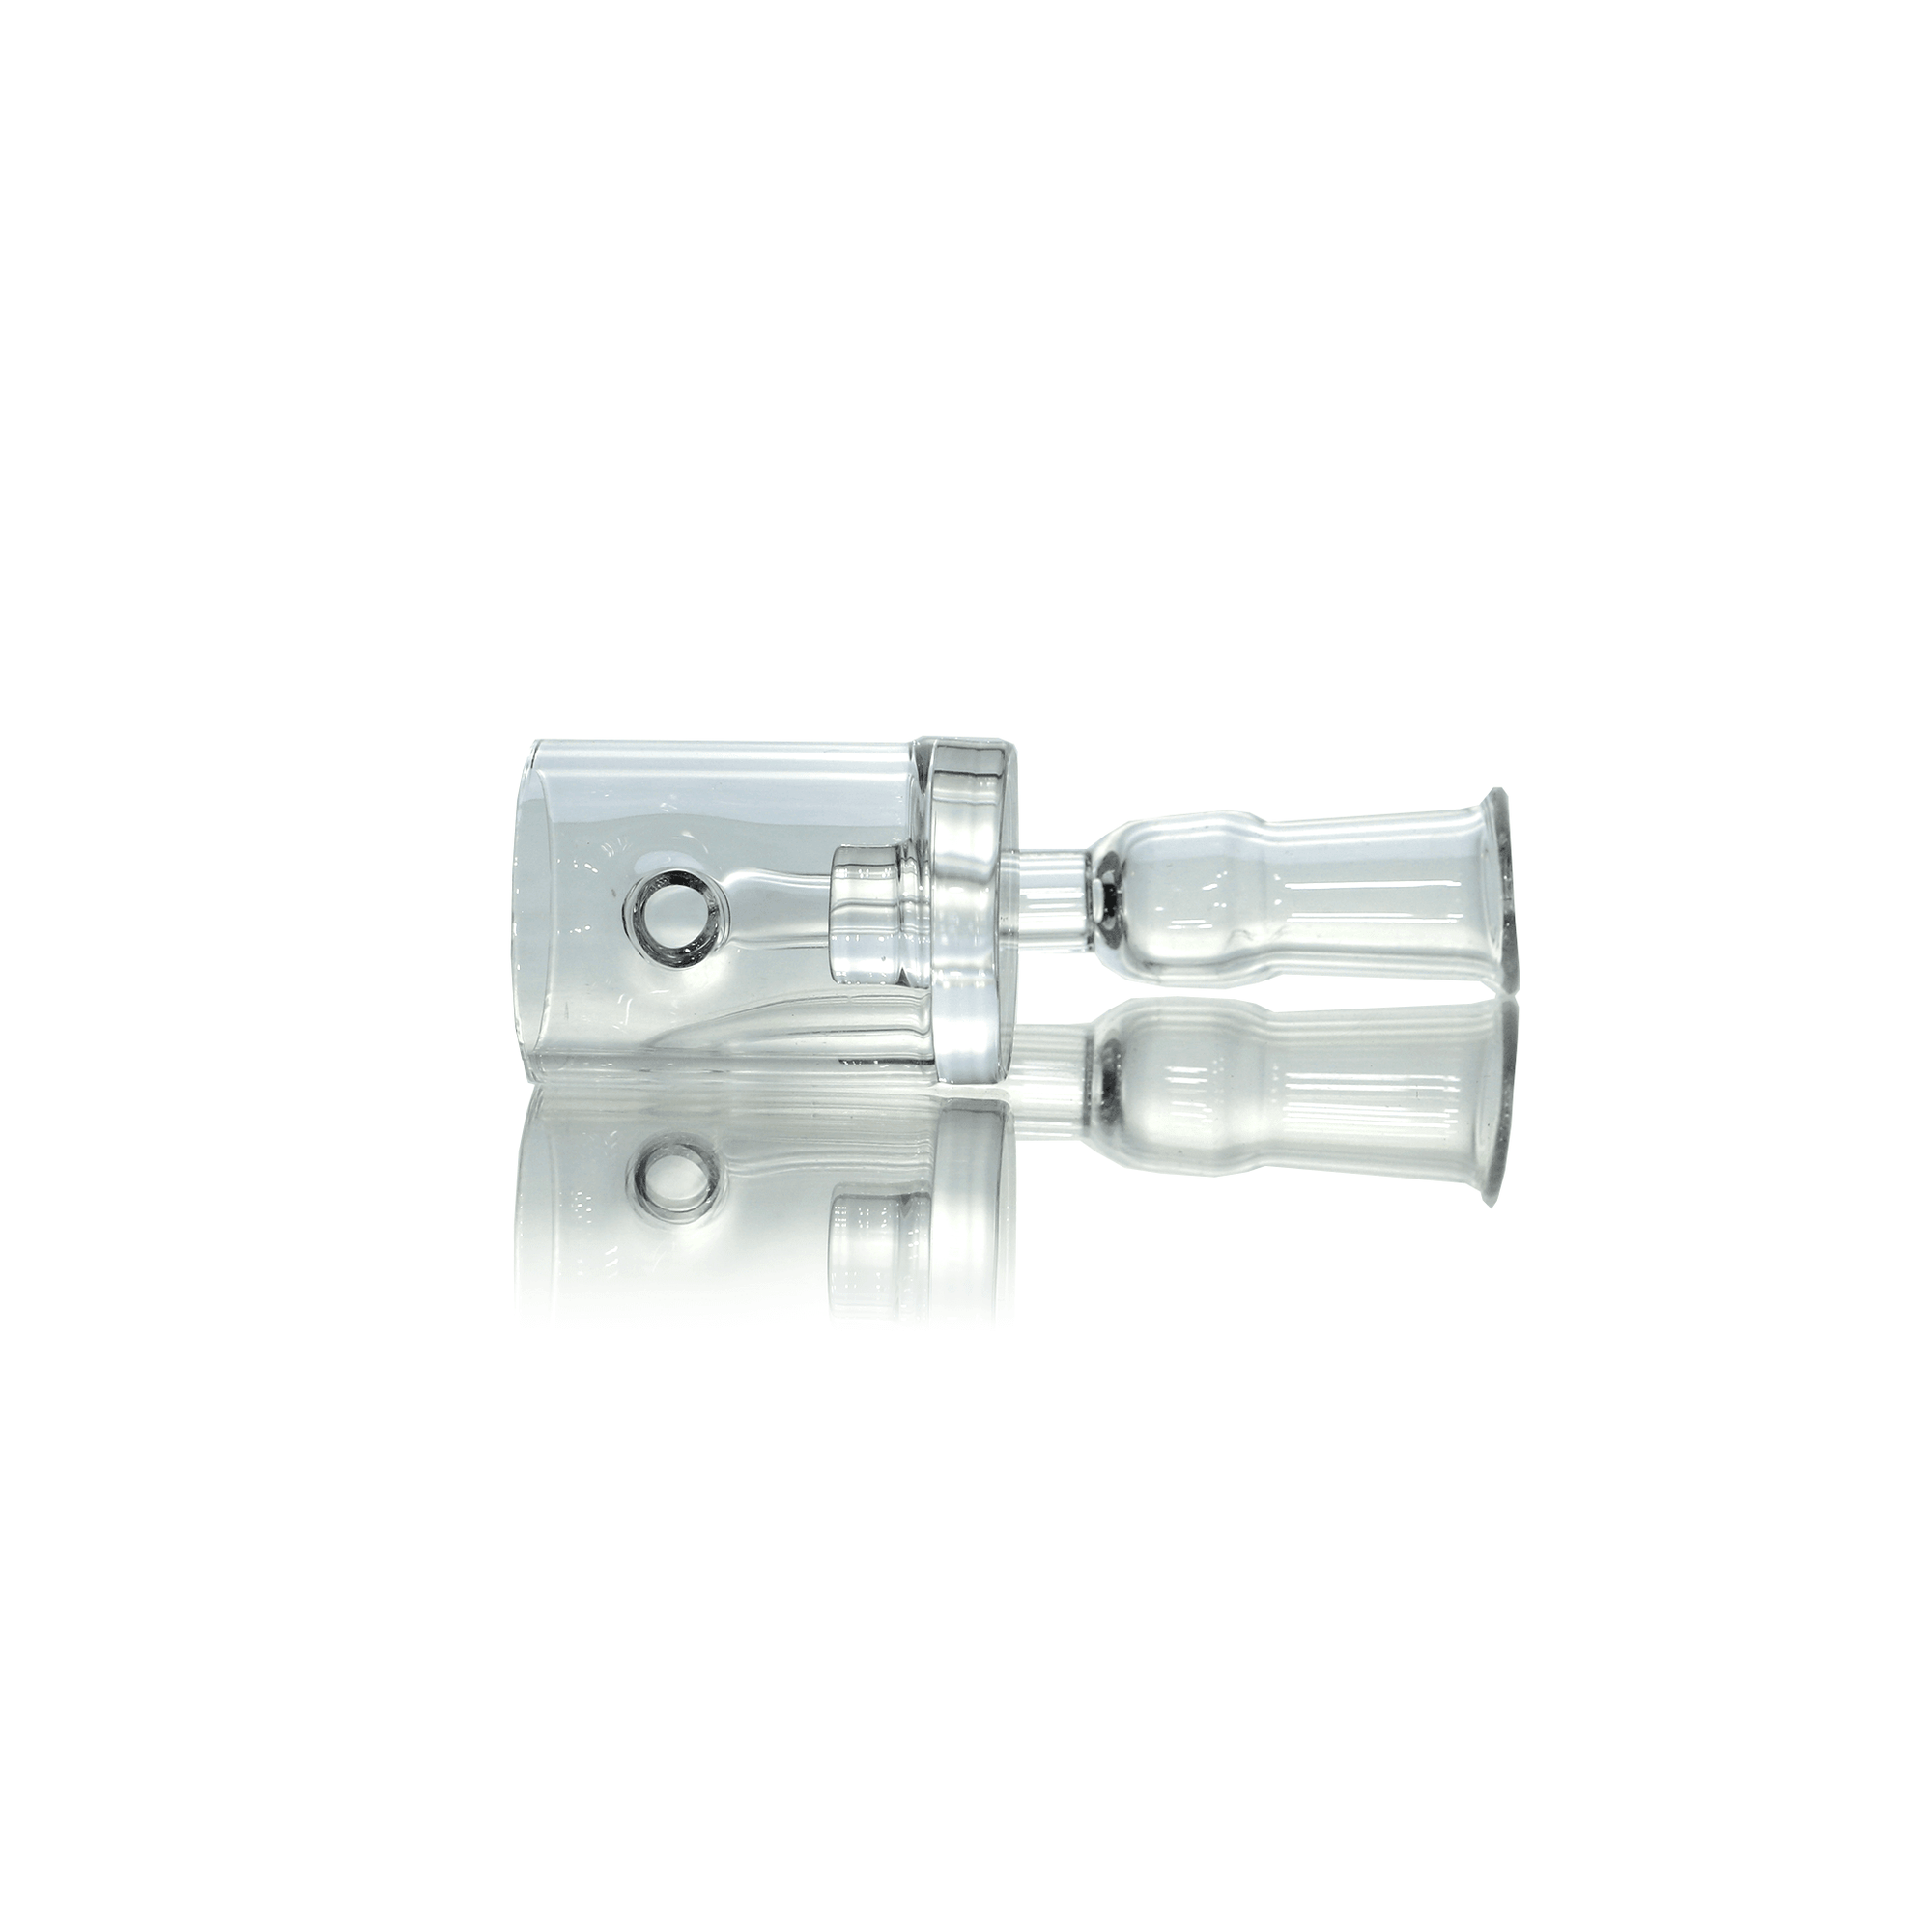 Quartz Banger Core Reactor 10mm Female With Saucer Cap | Full Stack | the dabbing specialists